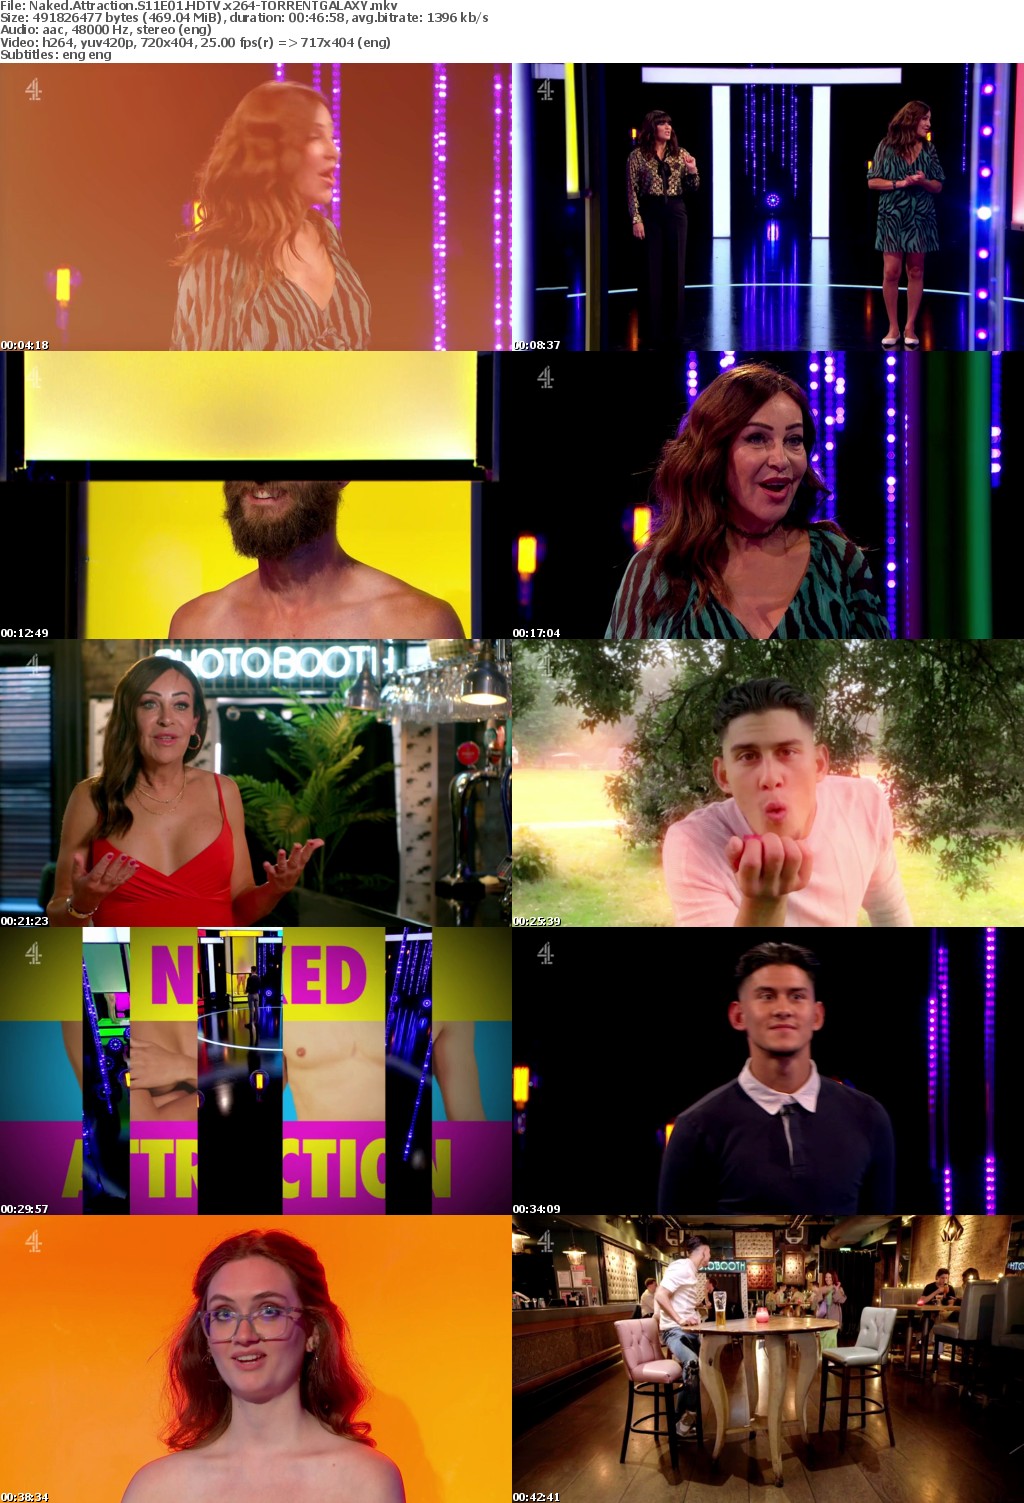 Naked Attraction S11E01 HDTV x264-GALAXY